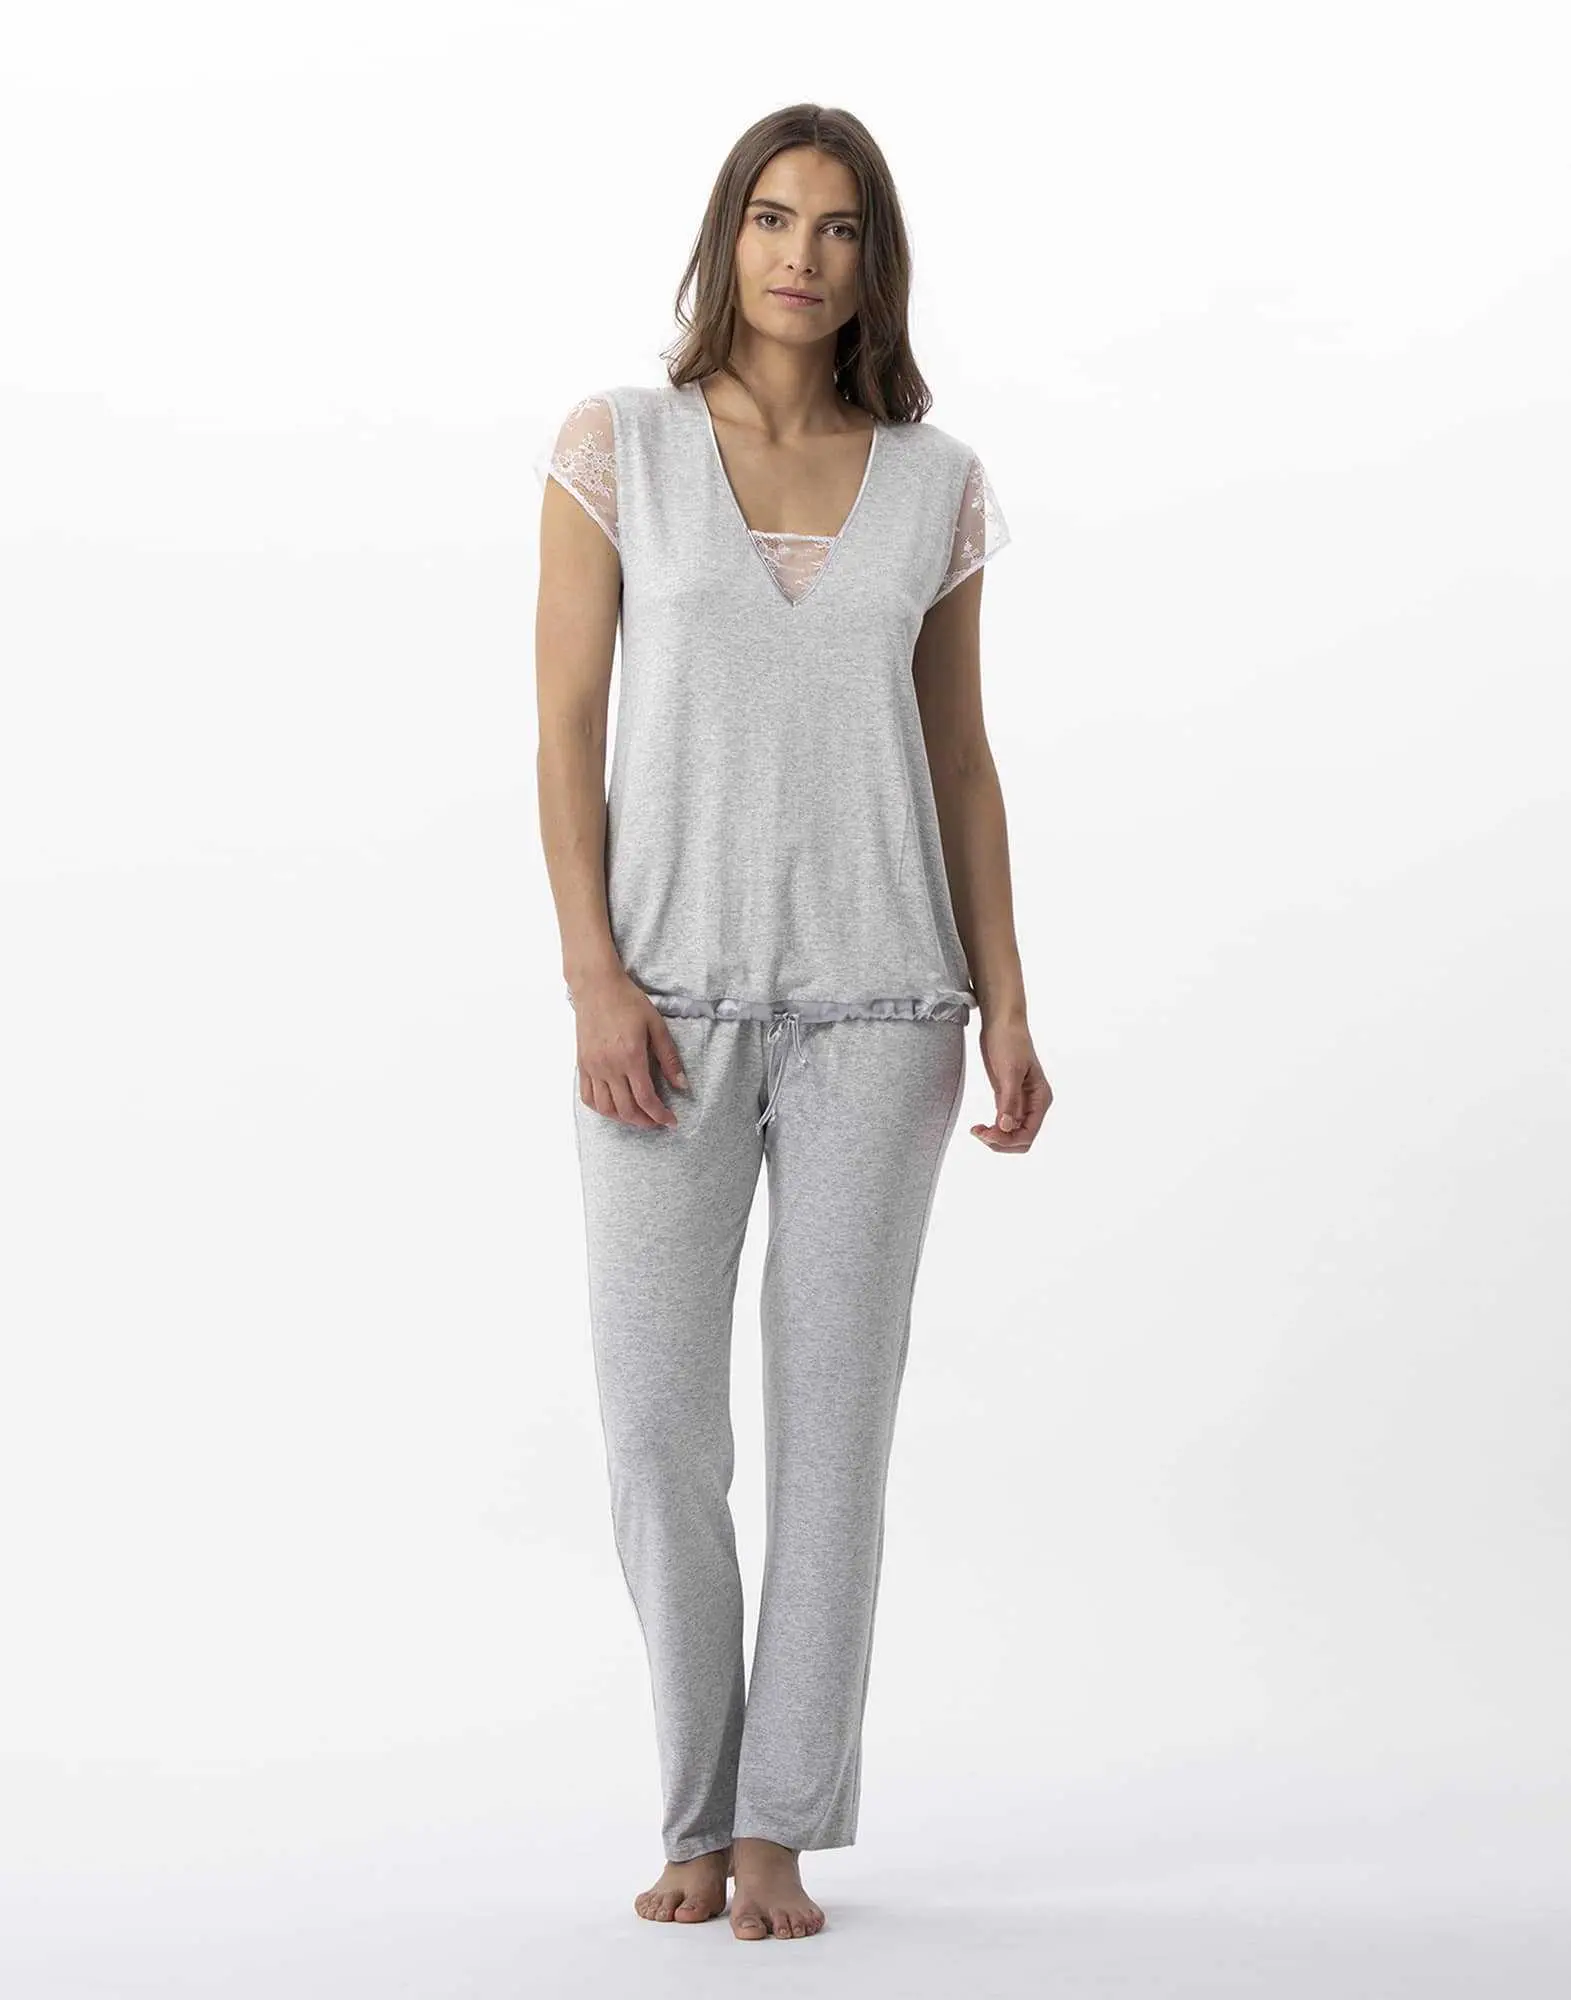 Pyjamas ANNAH 702 in jersey and lace mottled grey  | Lingerie le Chat